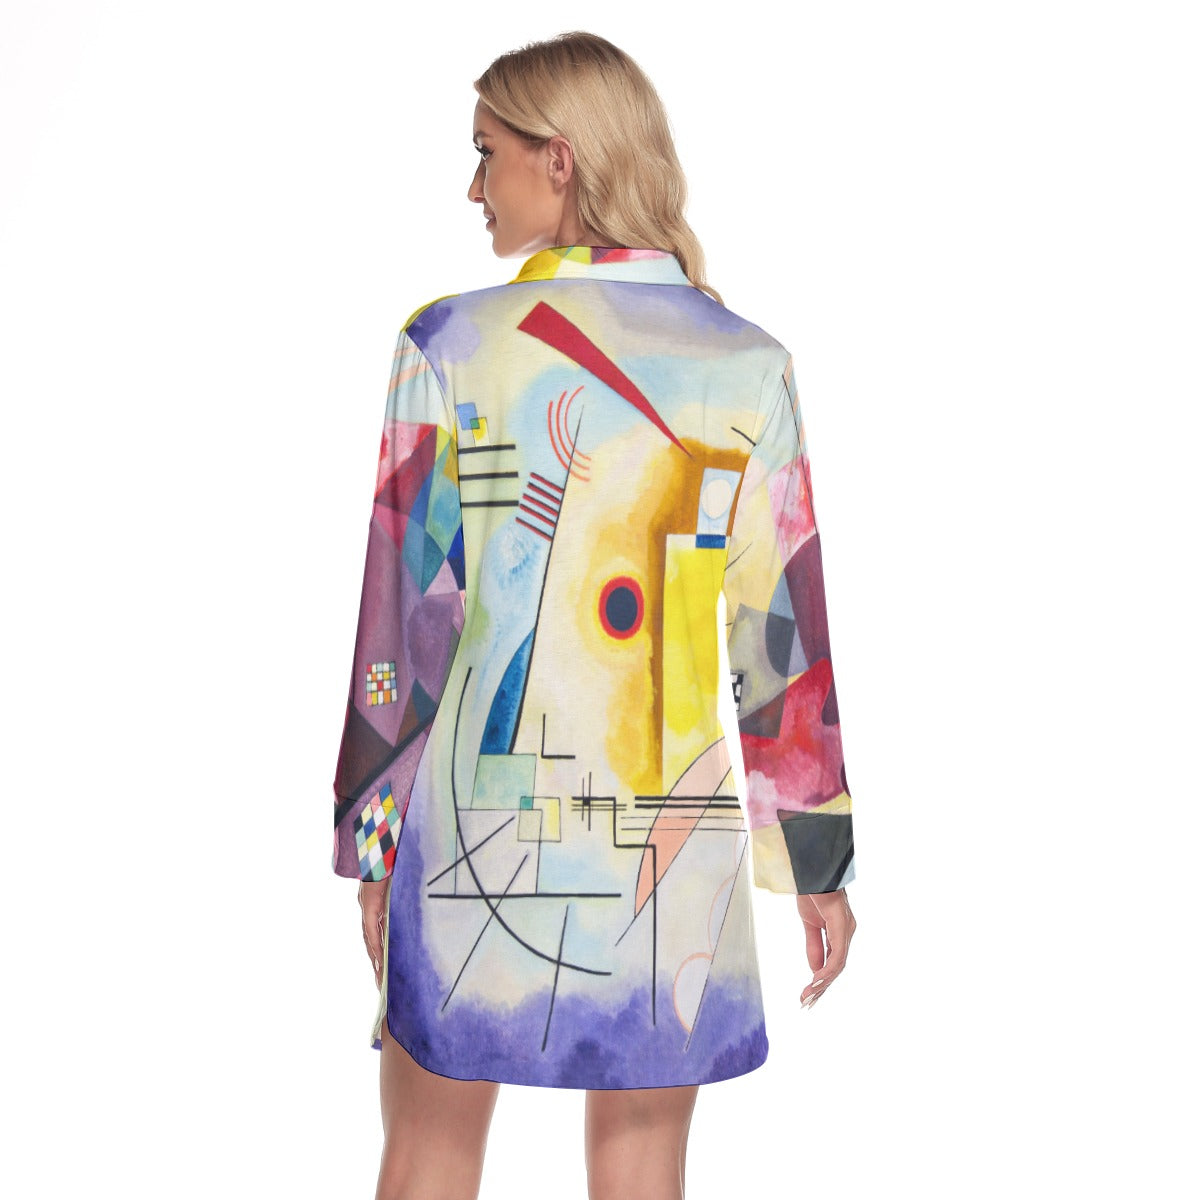 Colorful abstract art dress for fashion-forward individuals